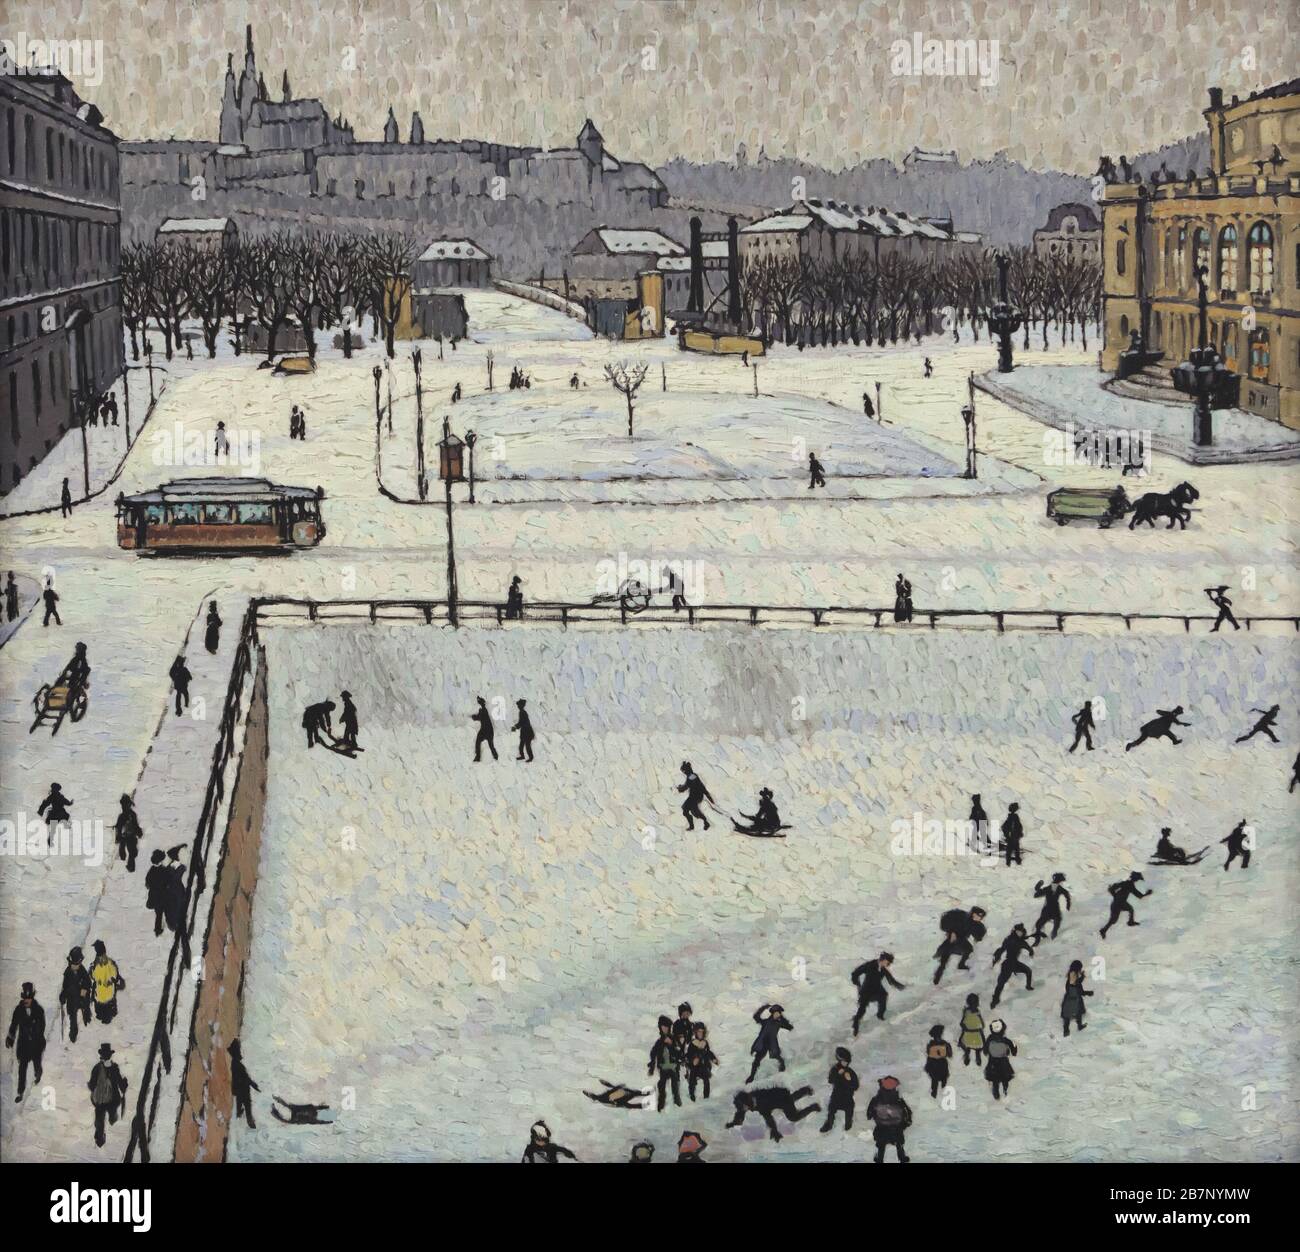 Painting 'Hradčany in Winter' by Czech modernist painter Jiří Jilovský (1914) on display at the permanent exhibition of the National Gallery (Národní galerie) in the Veletržní palác (Trade Fair Palace) in Prague, Czech Republic. The place previously known as Na Rejdišti and what in now known as Jan Palach Square (Náměstí Jana Palacha) in Prague, Czech Republic, is depicted in the painting. The Rudolfinum concert hall is seen at the right. The construction site of the Faculty of Arts (Filozofická fakulta) of Charles University (Univerzita Karlova) in seen in the foreground. Prague Castle and Hr Stock Photo